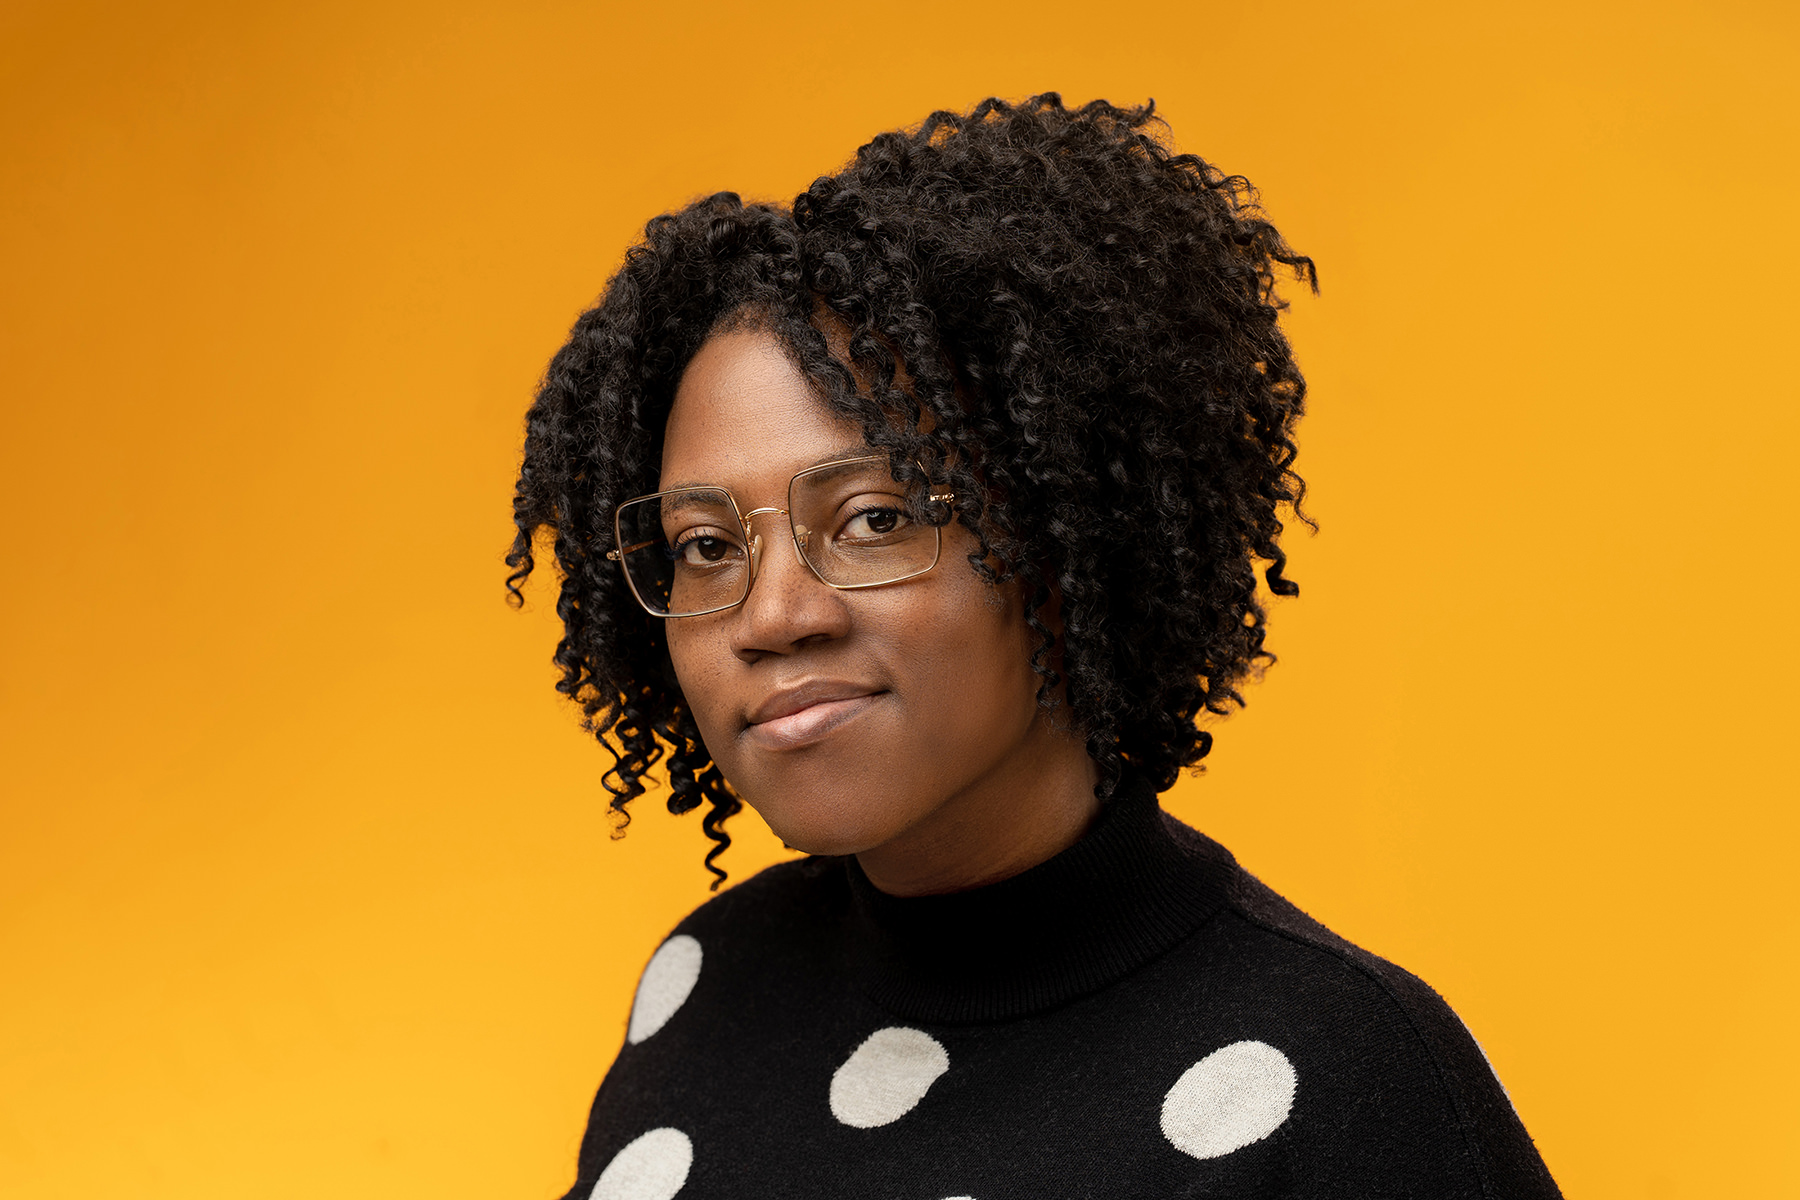 A woman with curly hair wearing glasses and a polka dot sweater poses for her Denver headshots against a yellow background.